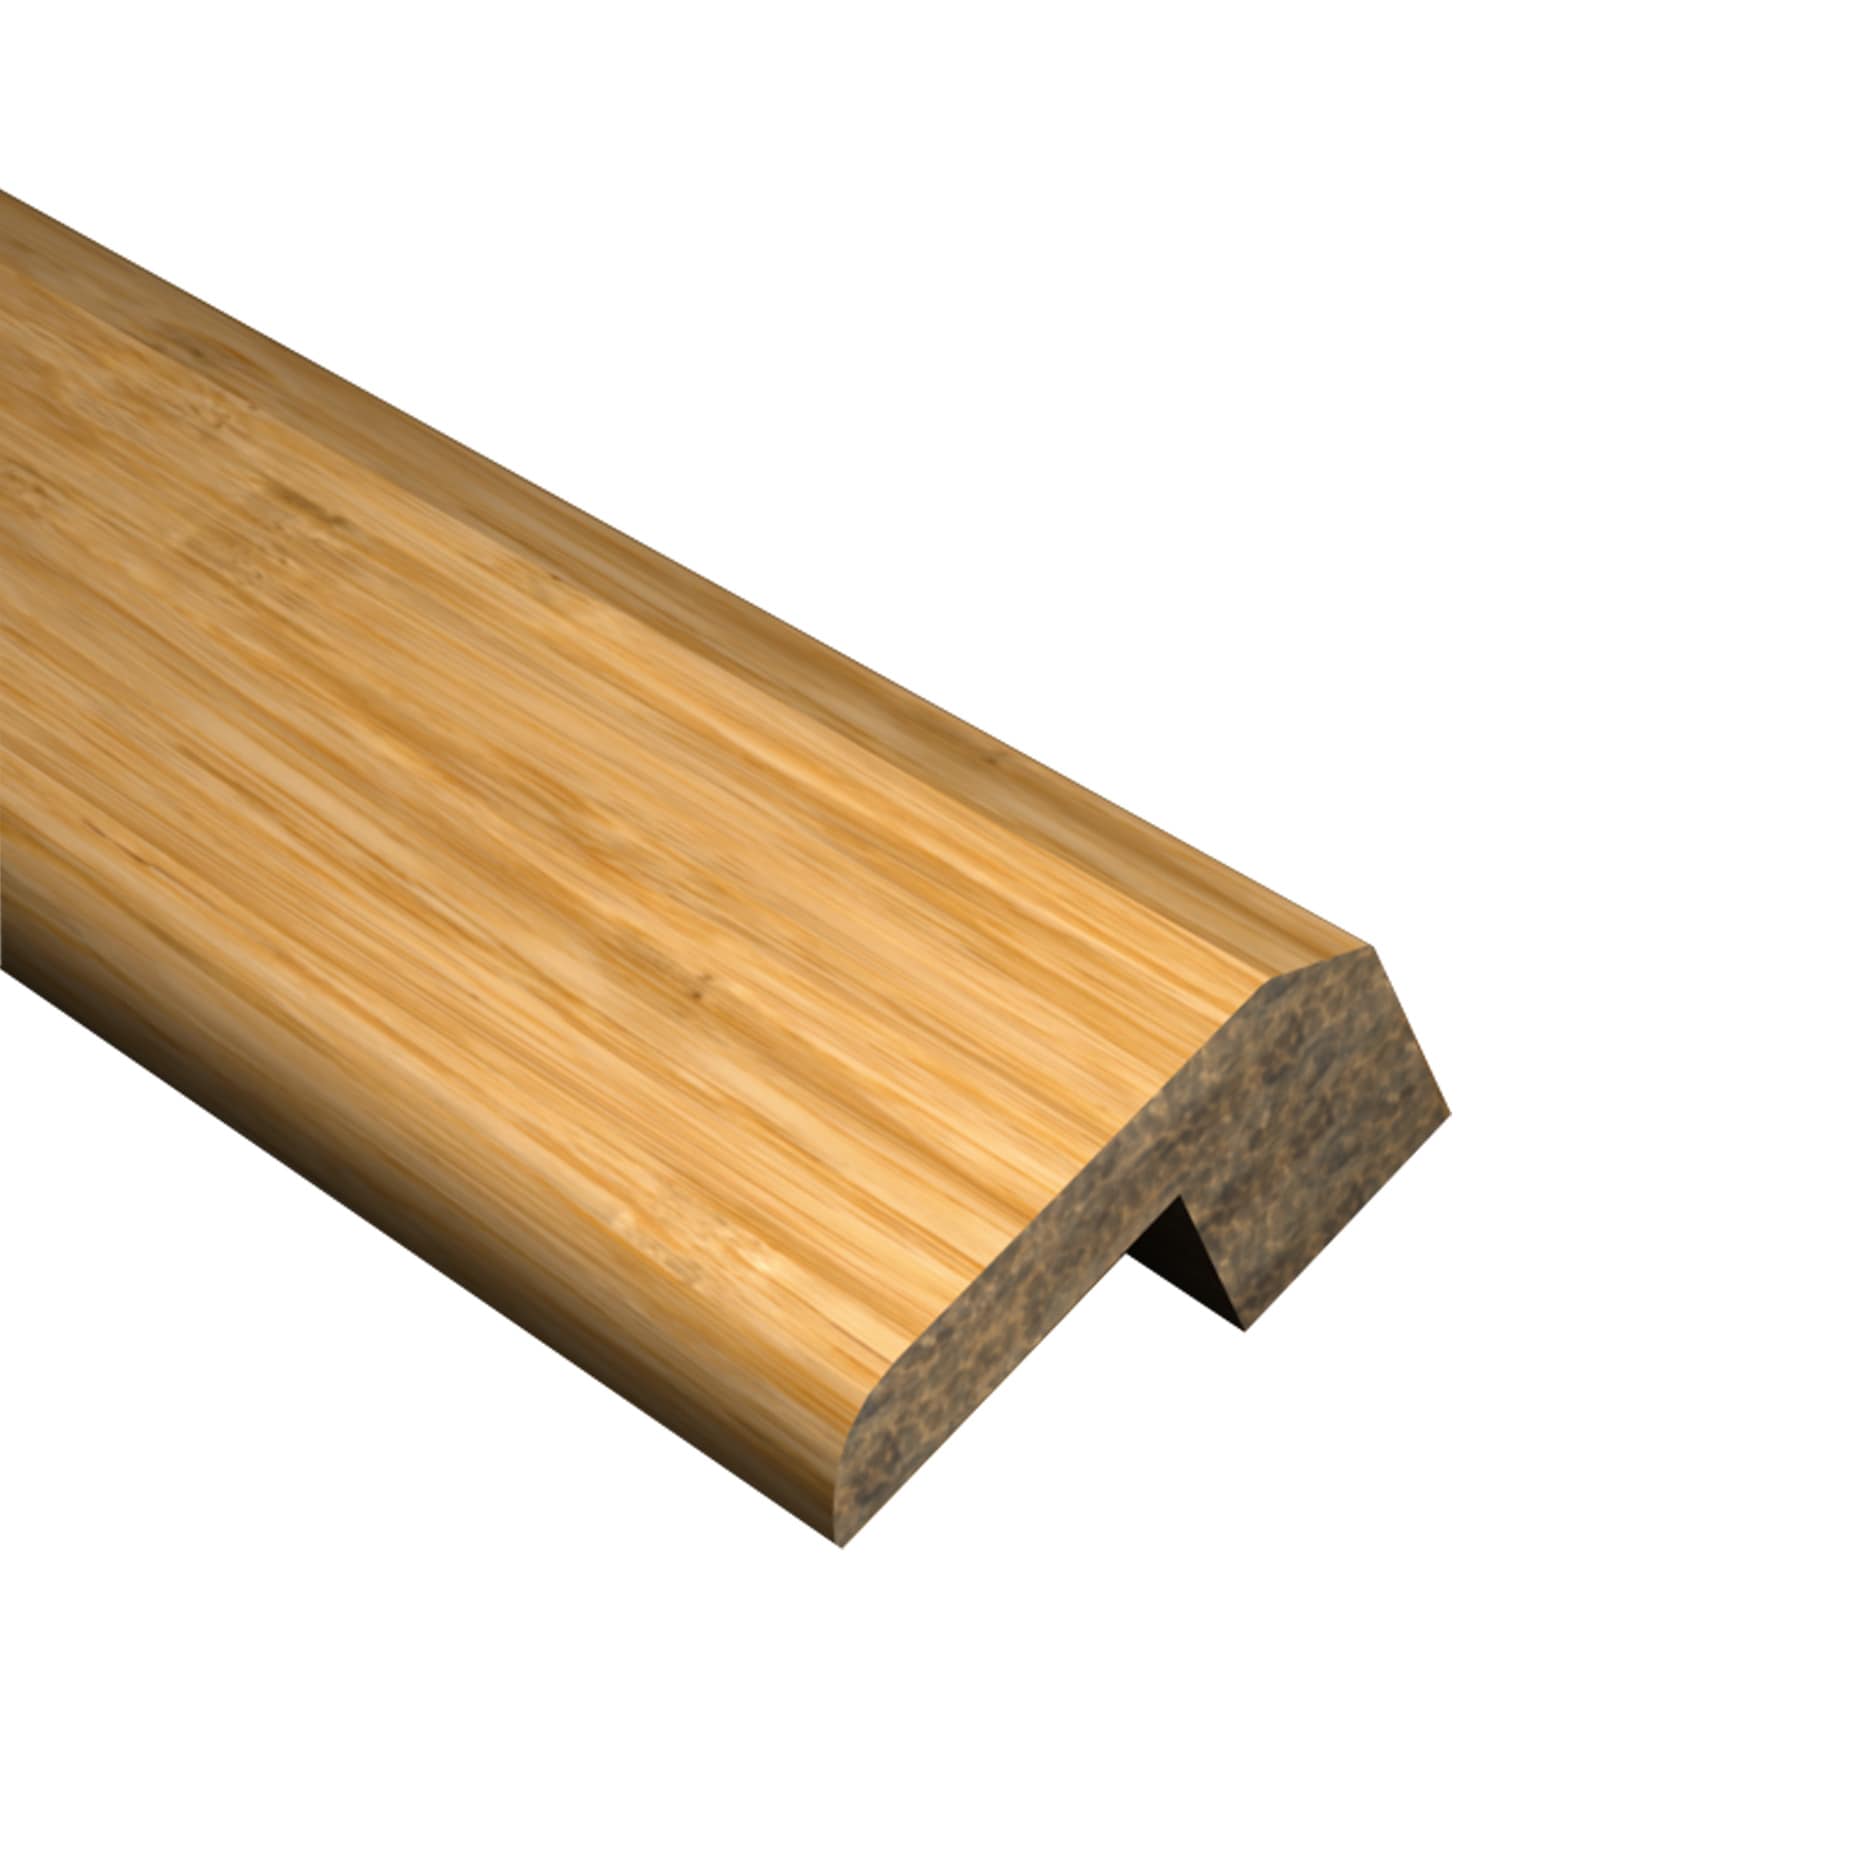 Blonde Natural Bamboo Plywood 3/4in Thickness